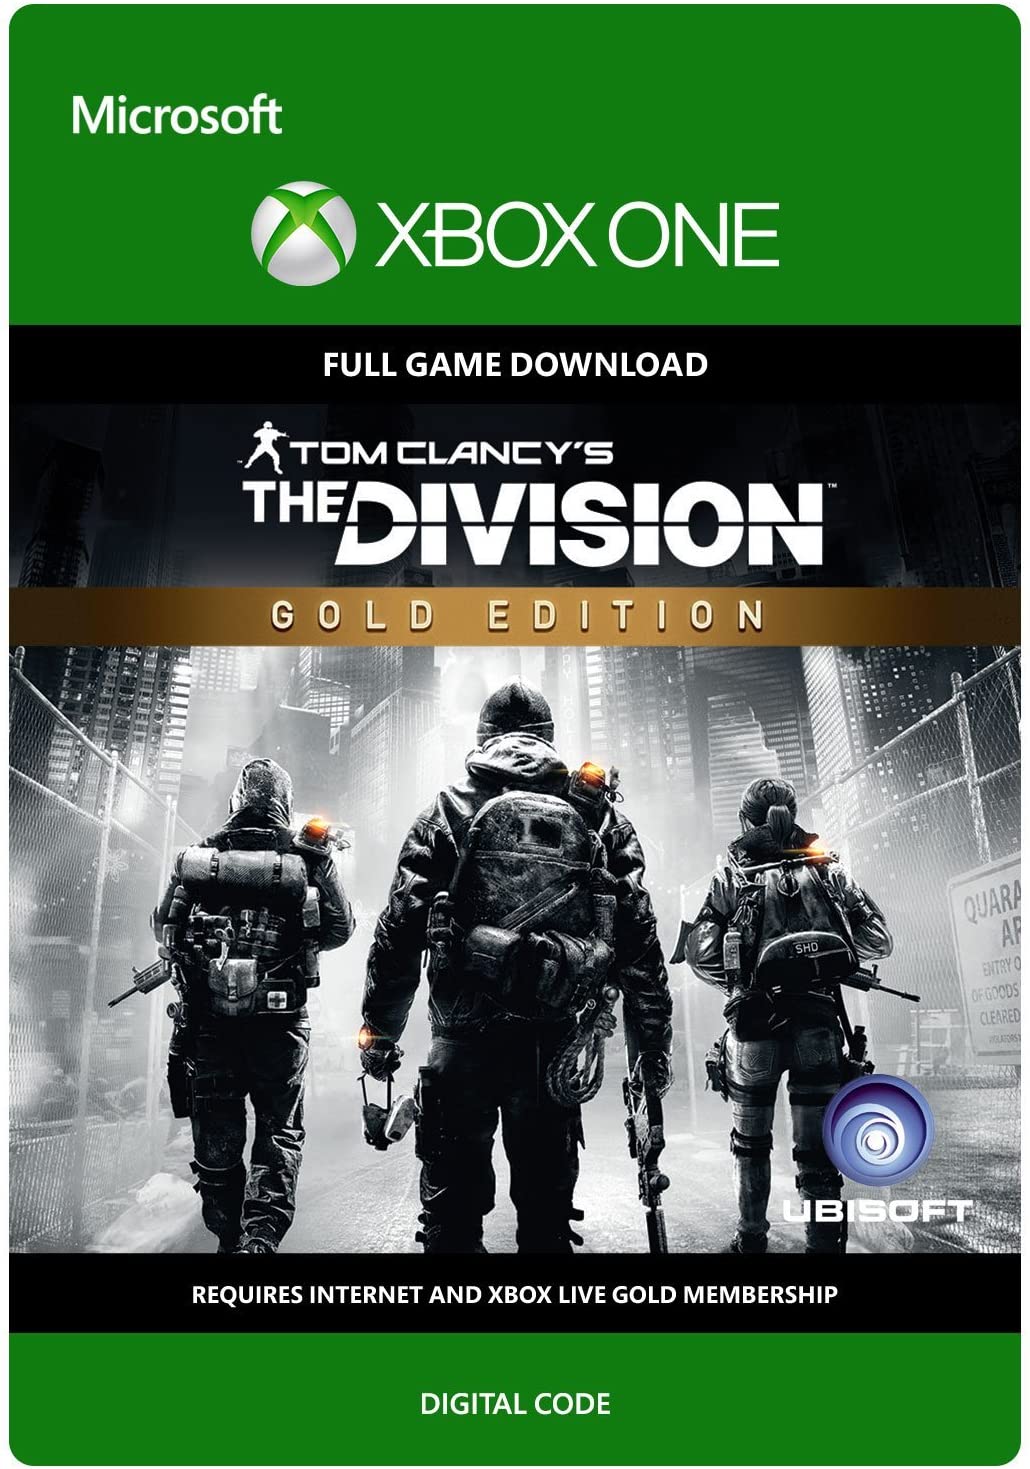 Tom Clancy's The Division Gold Edition VPN ACTIVATED Key (Xbox One)